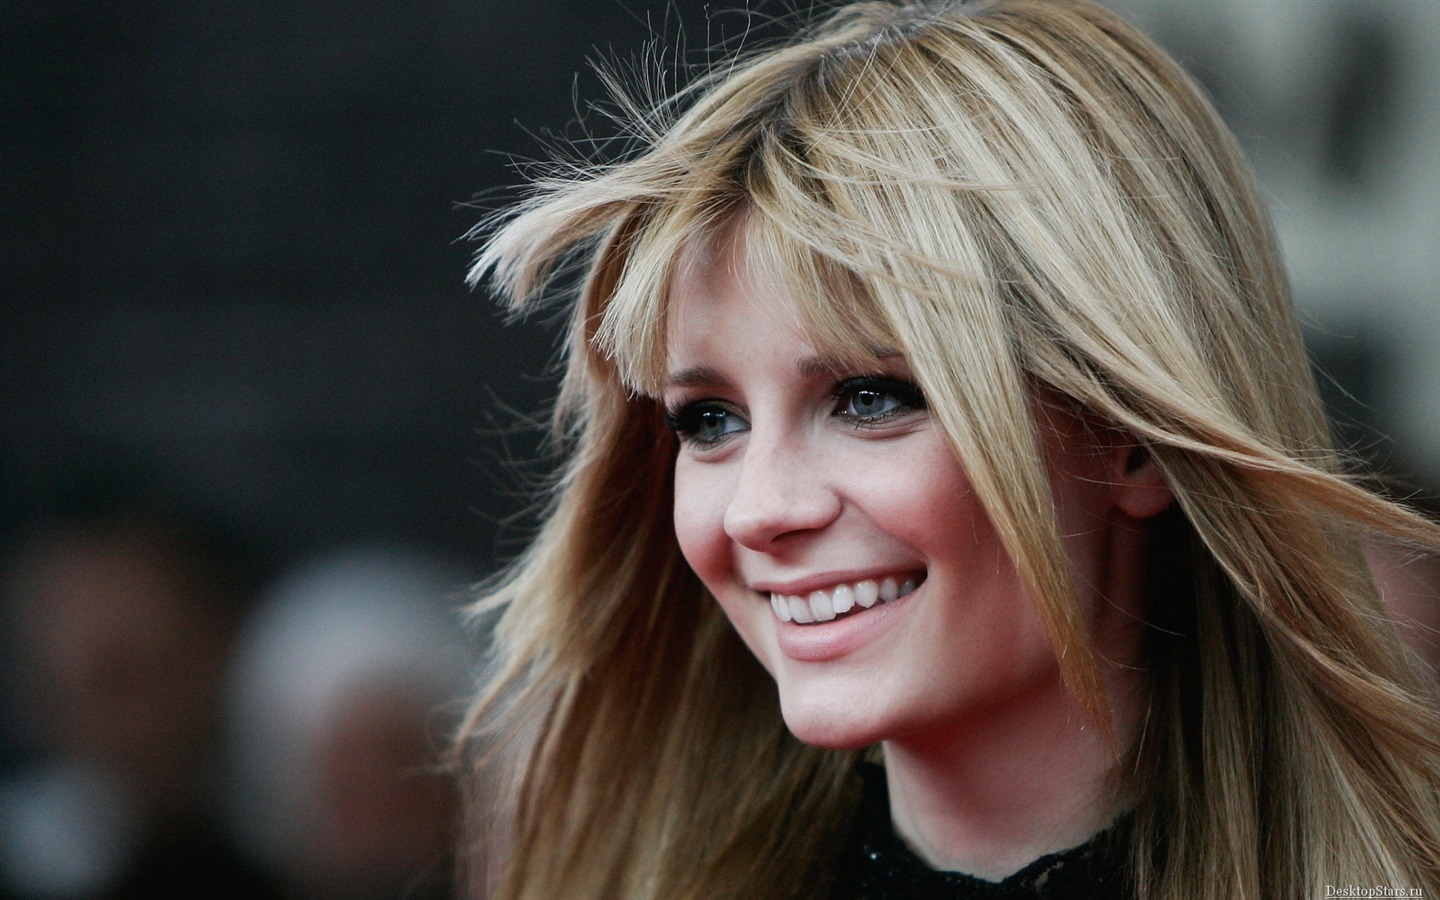 Mischa Barton #023 - 1440x900 Wallpapers Pictures Photos Images